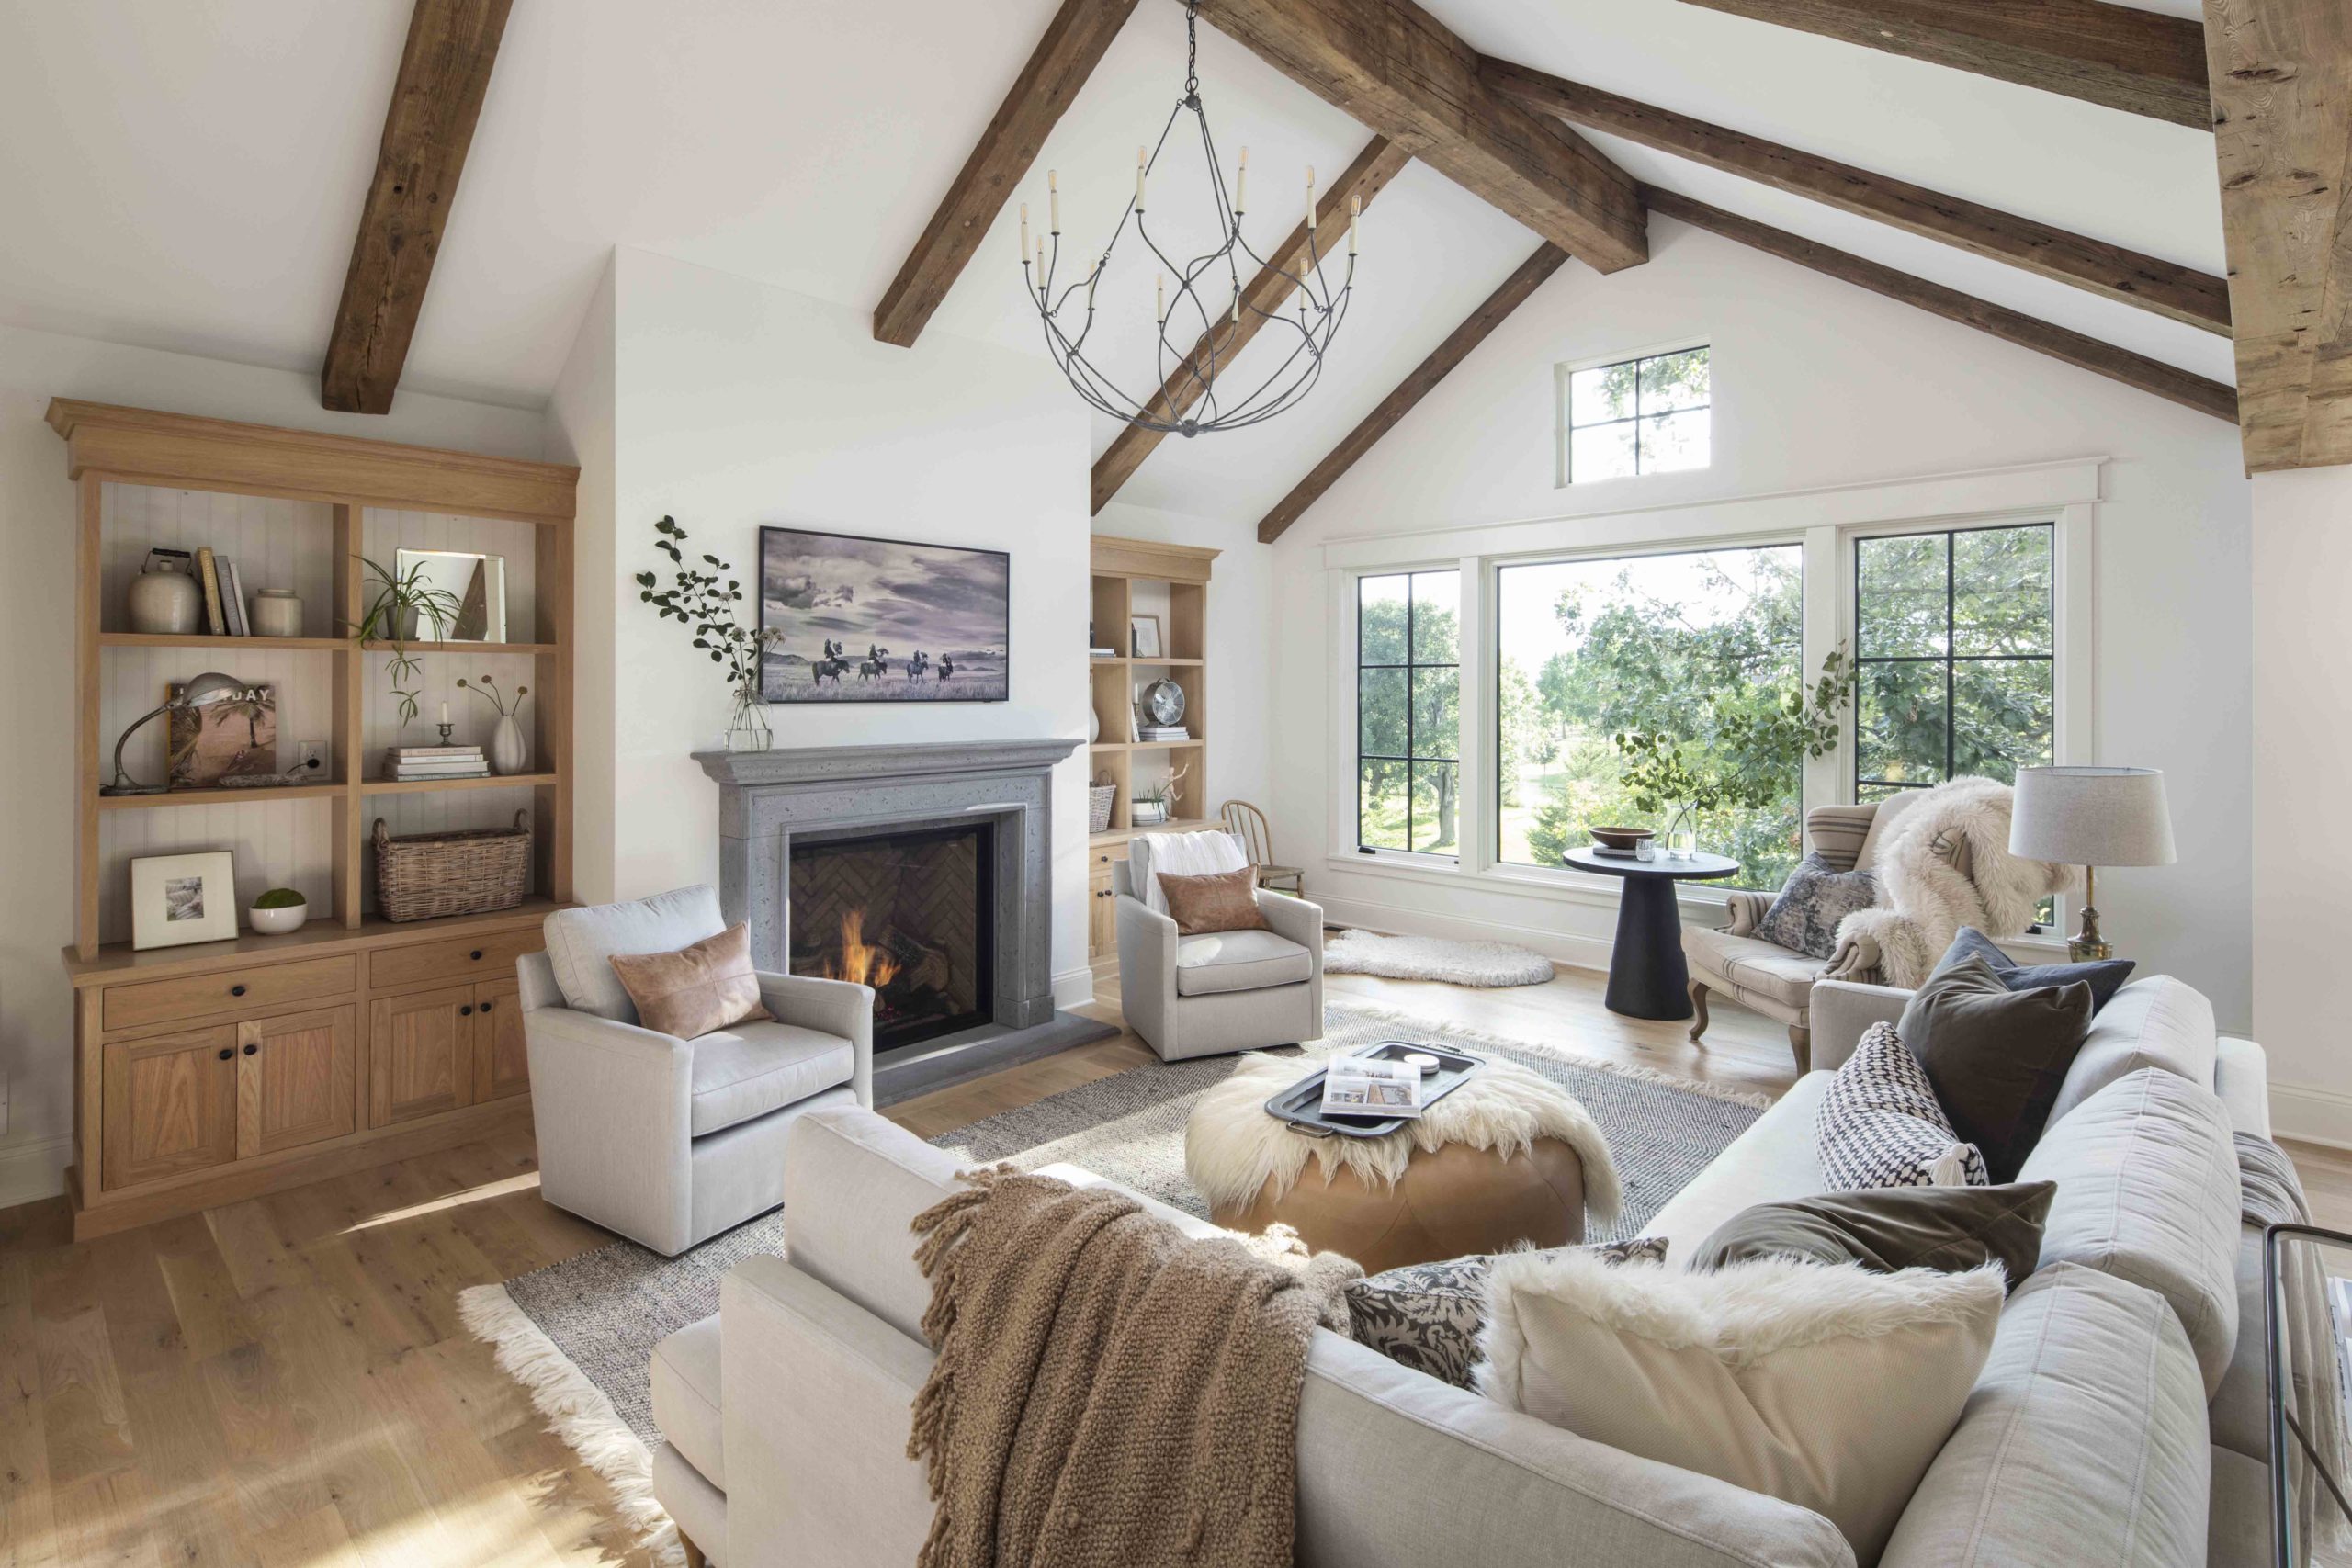 A prairie-style living room with wood beams and a cozy fireplace.